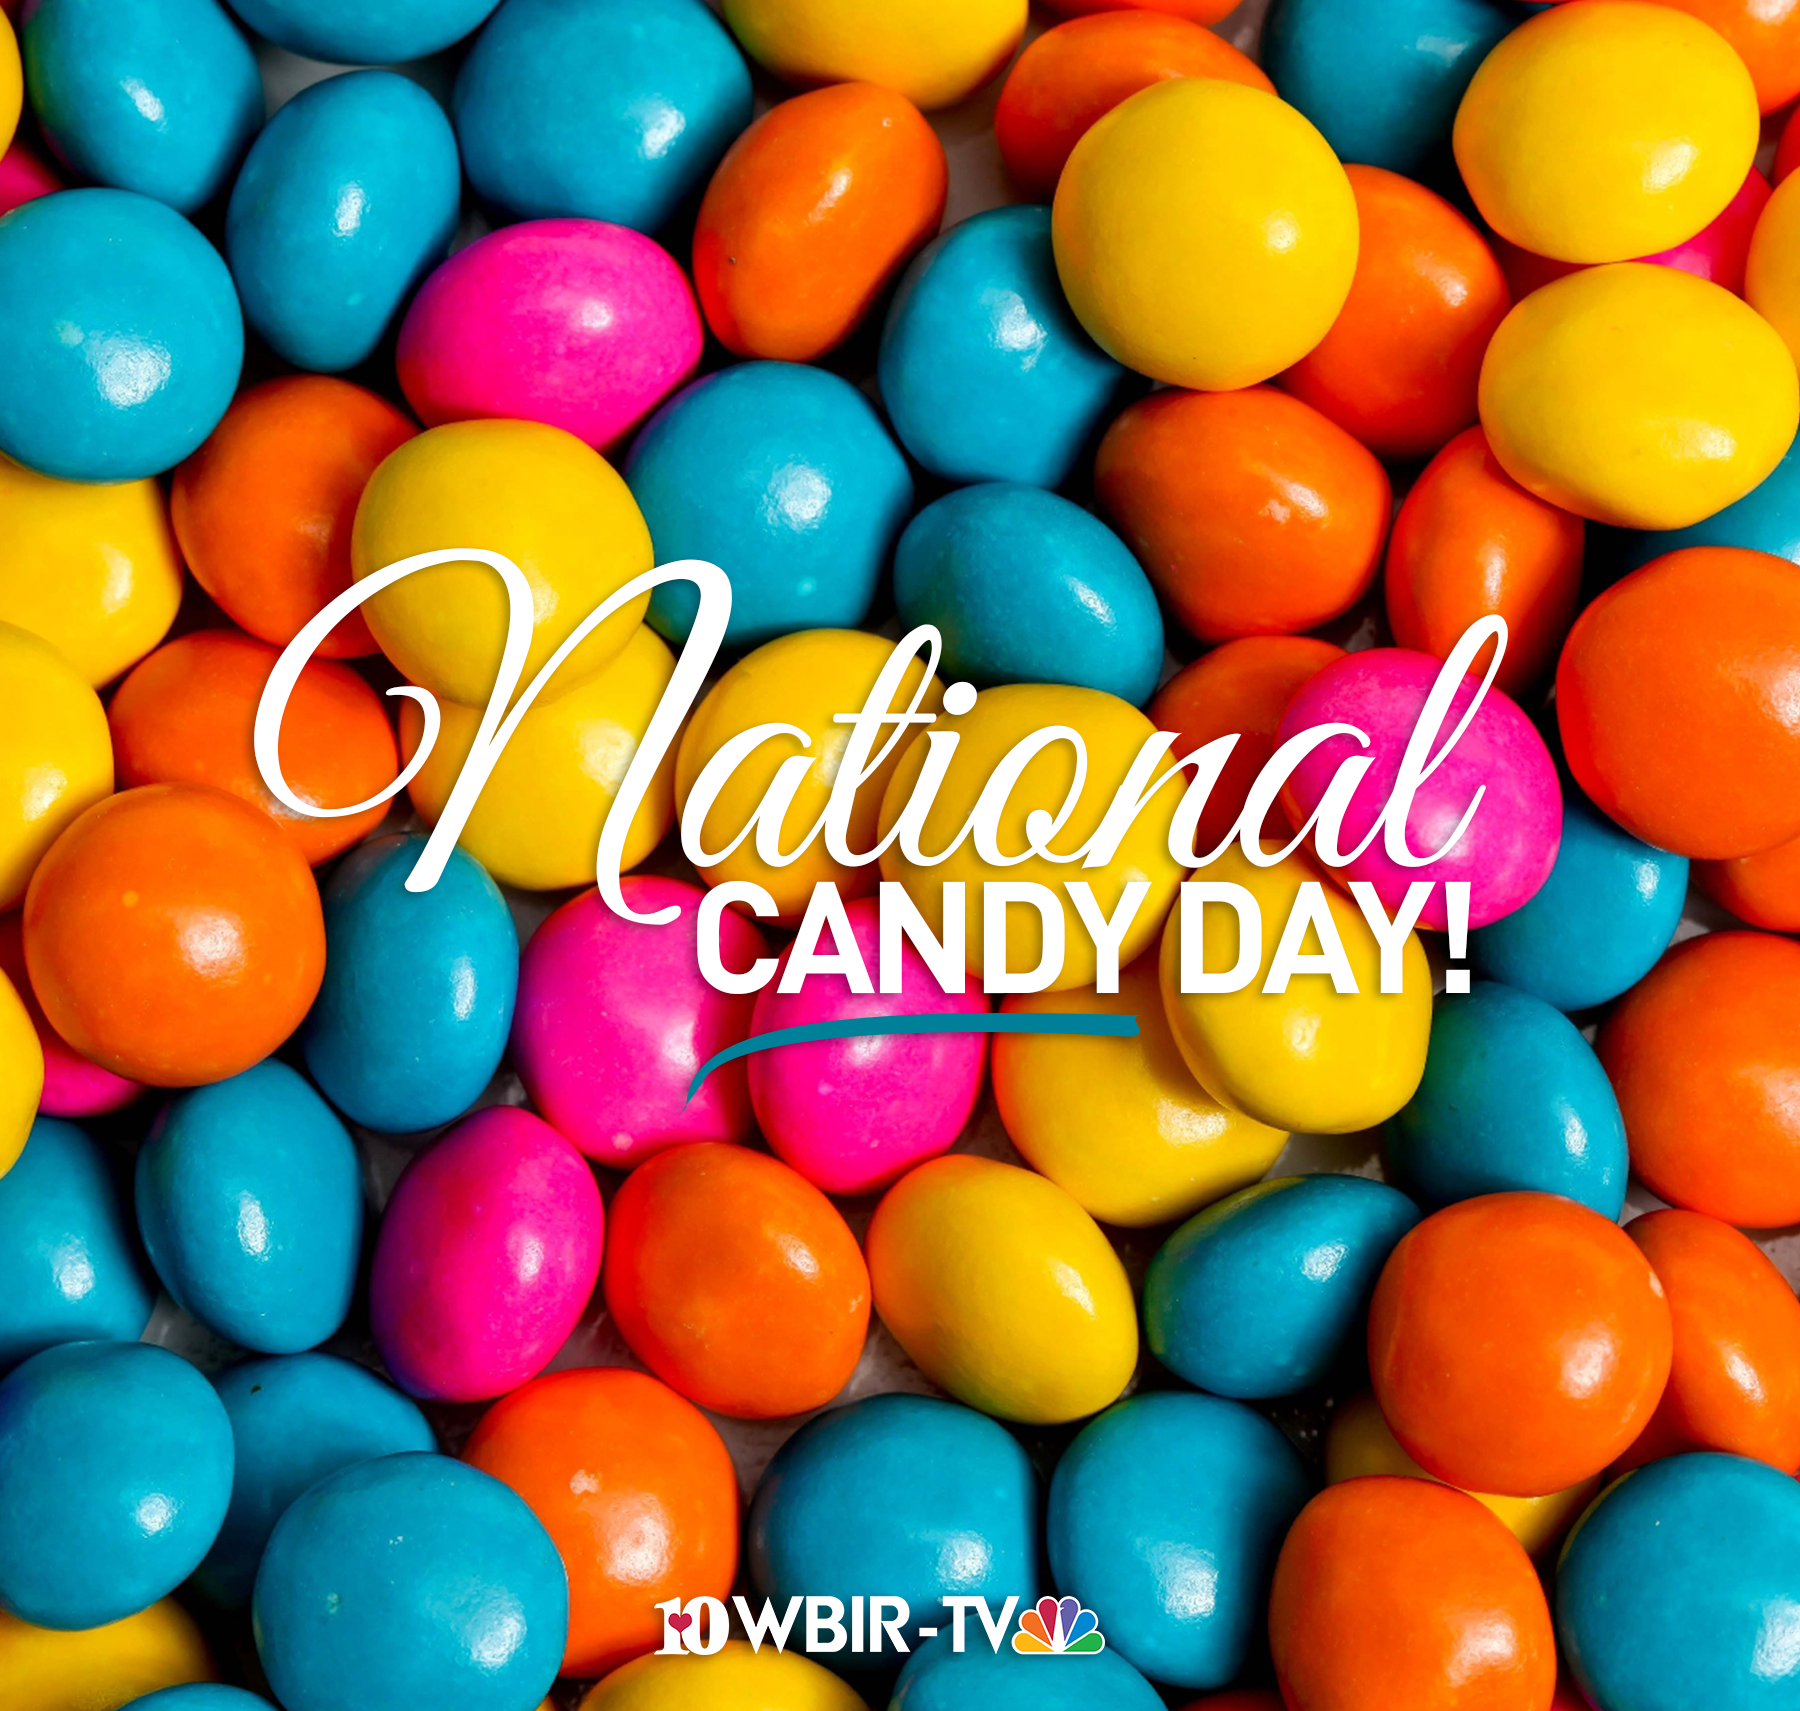 National Candy Day (November 4th)